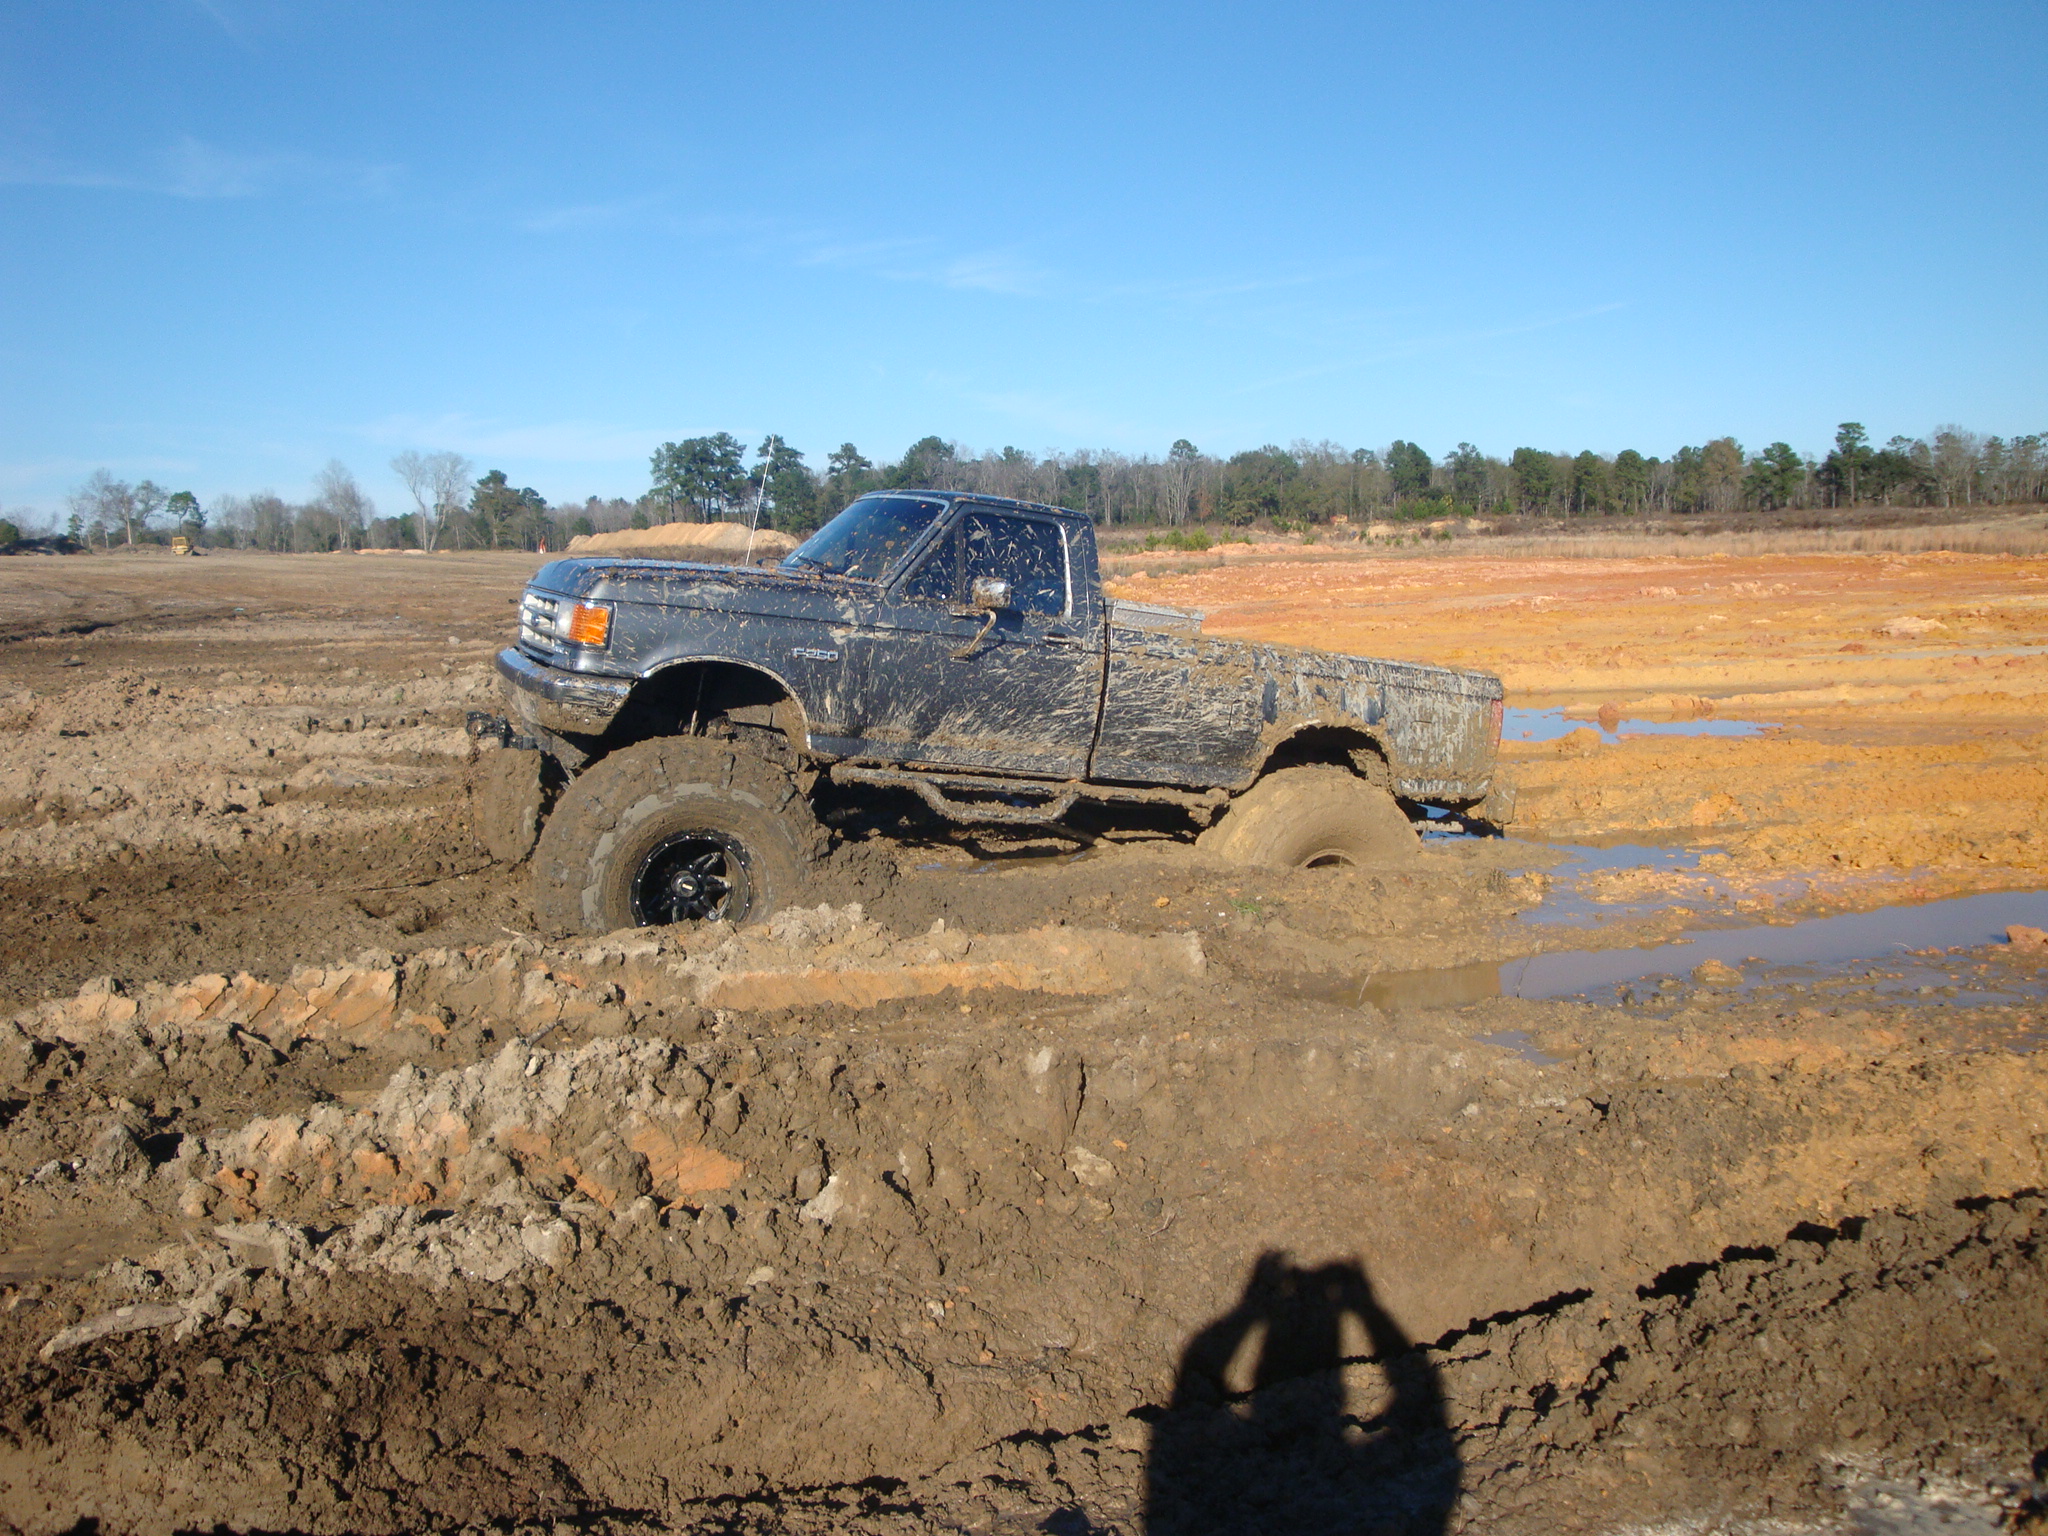 Mud Bogging Quotes And Sayings.